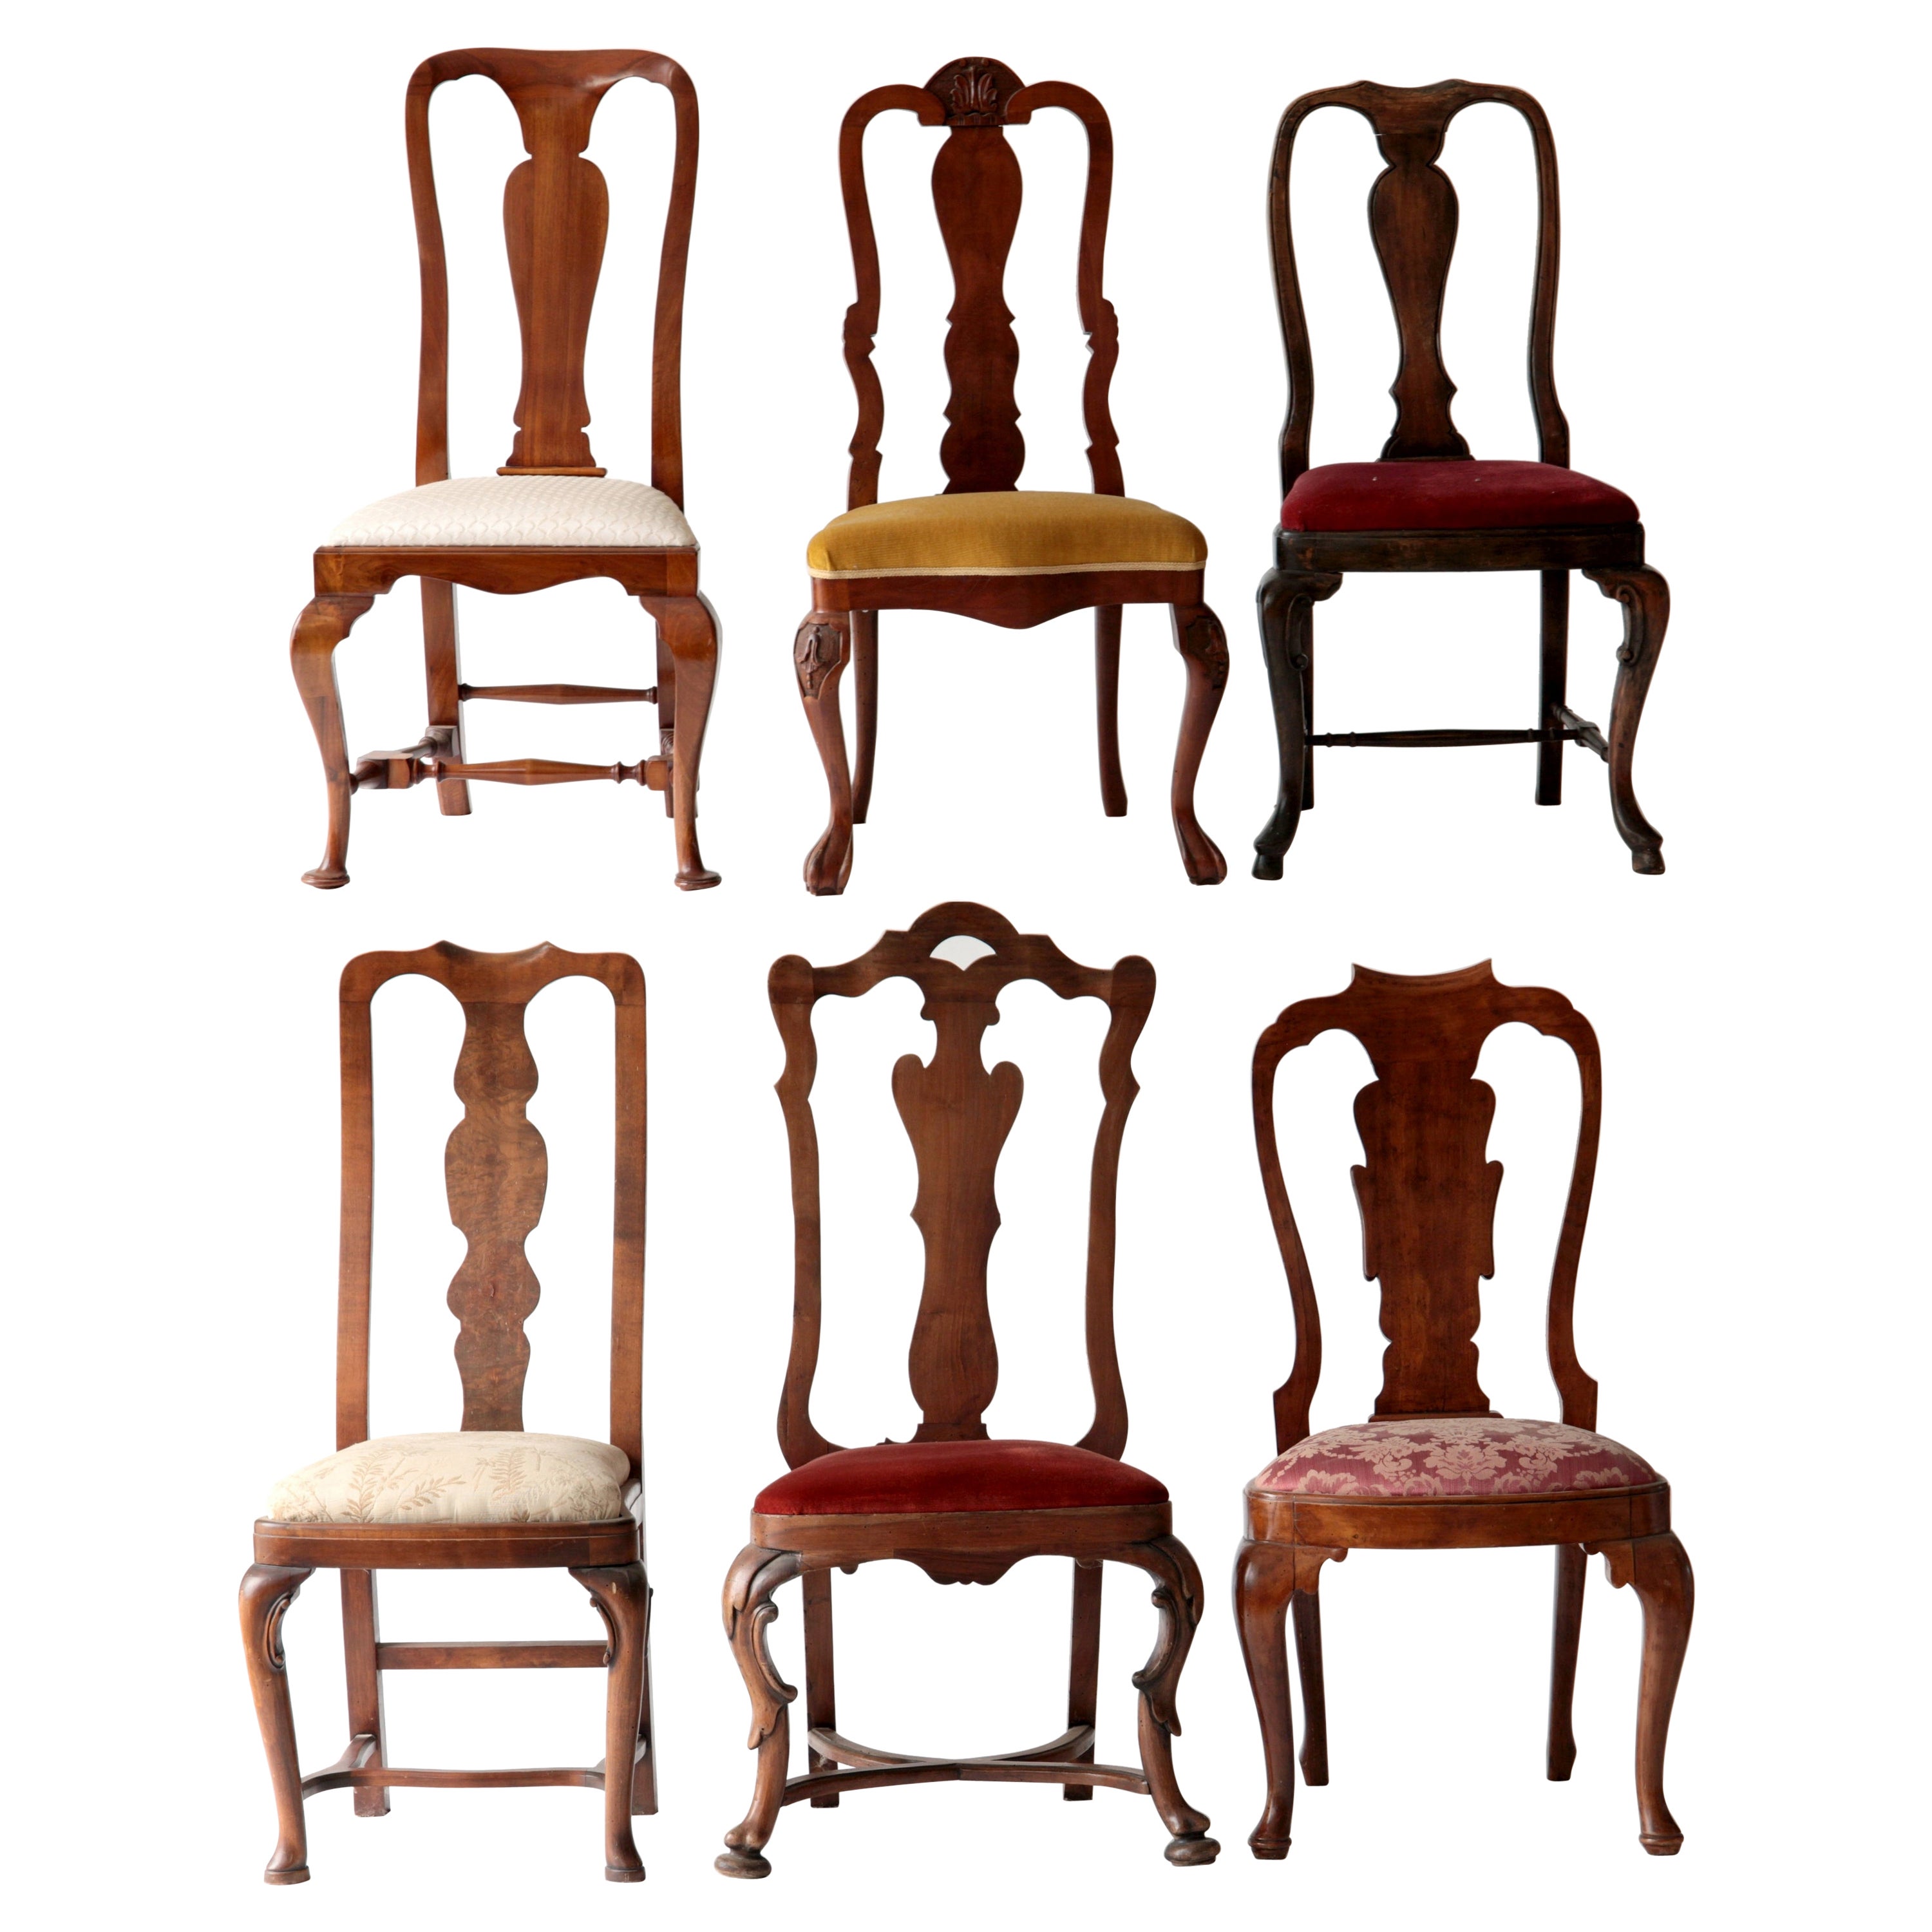 Queen Anne Eclectic Set, Unique Set of Six chairs, Each in Different Design